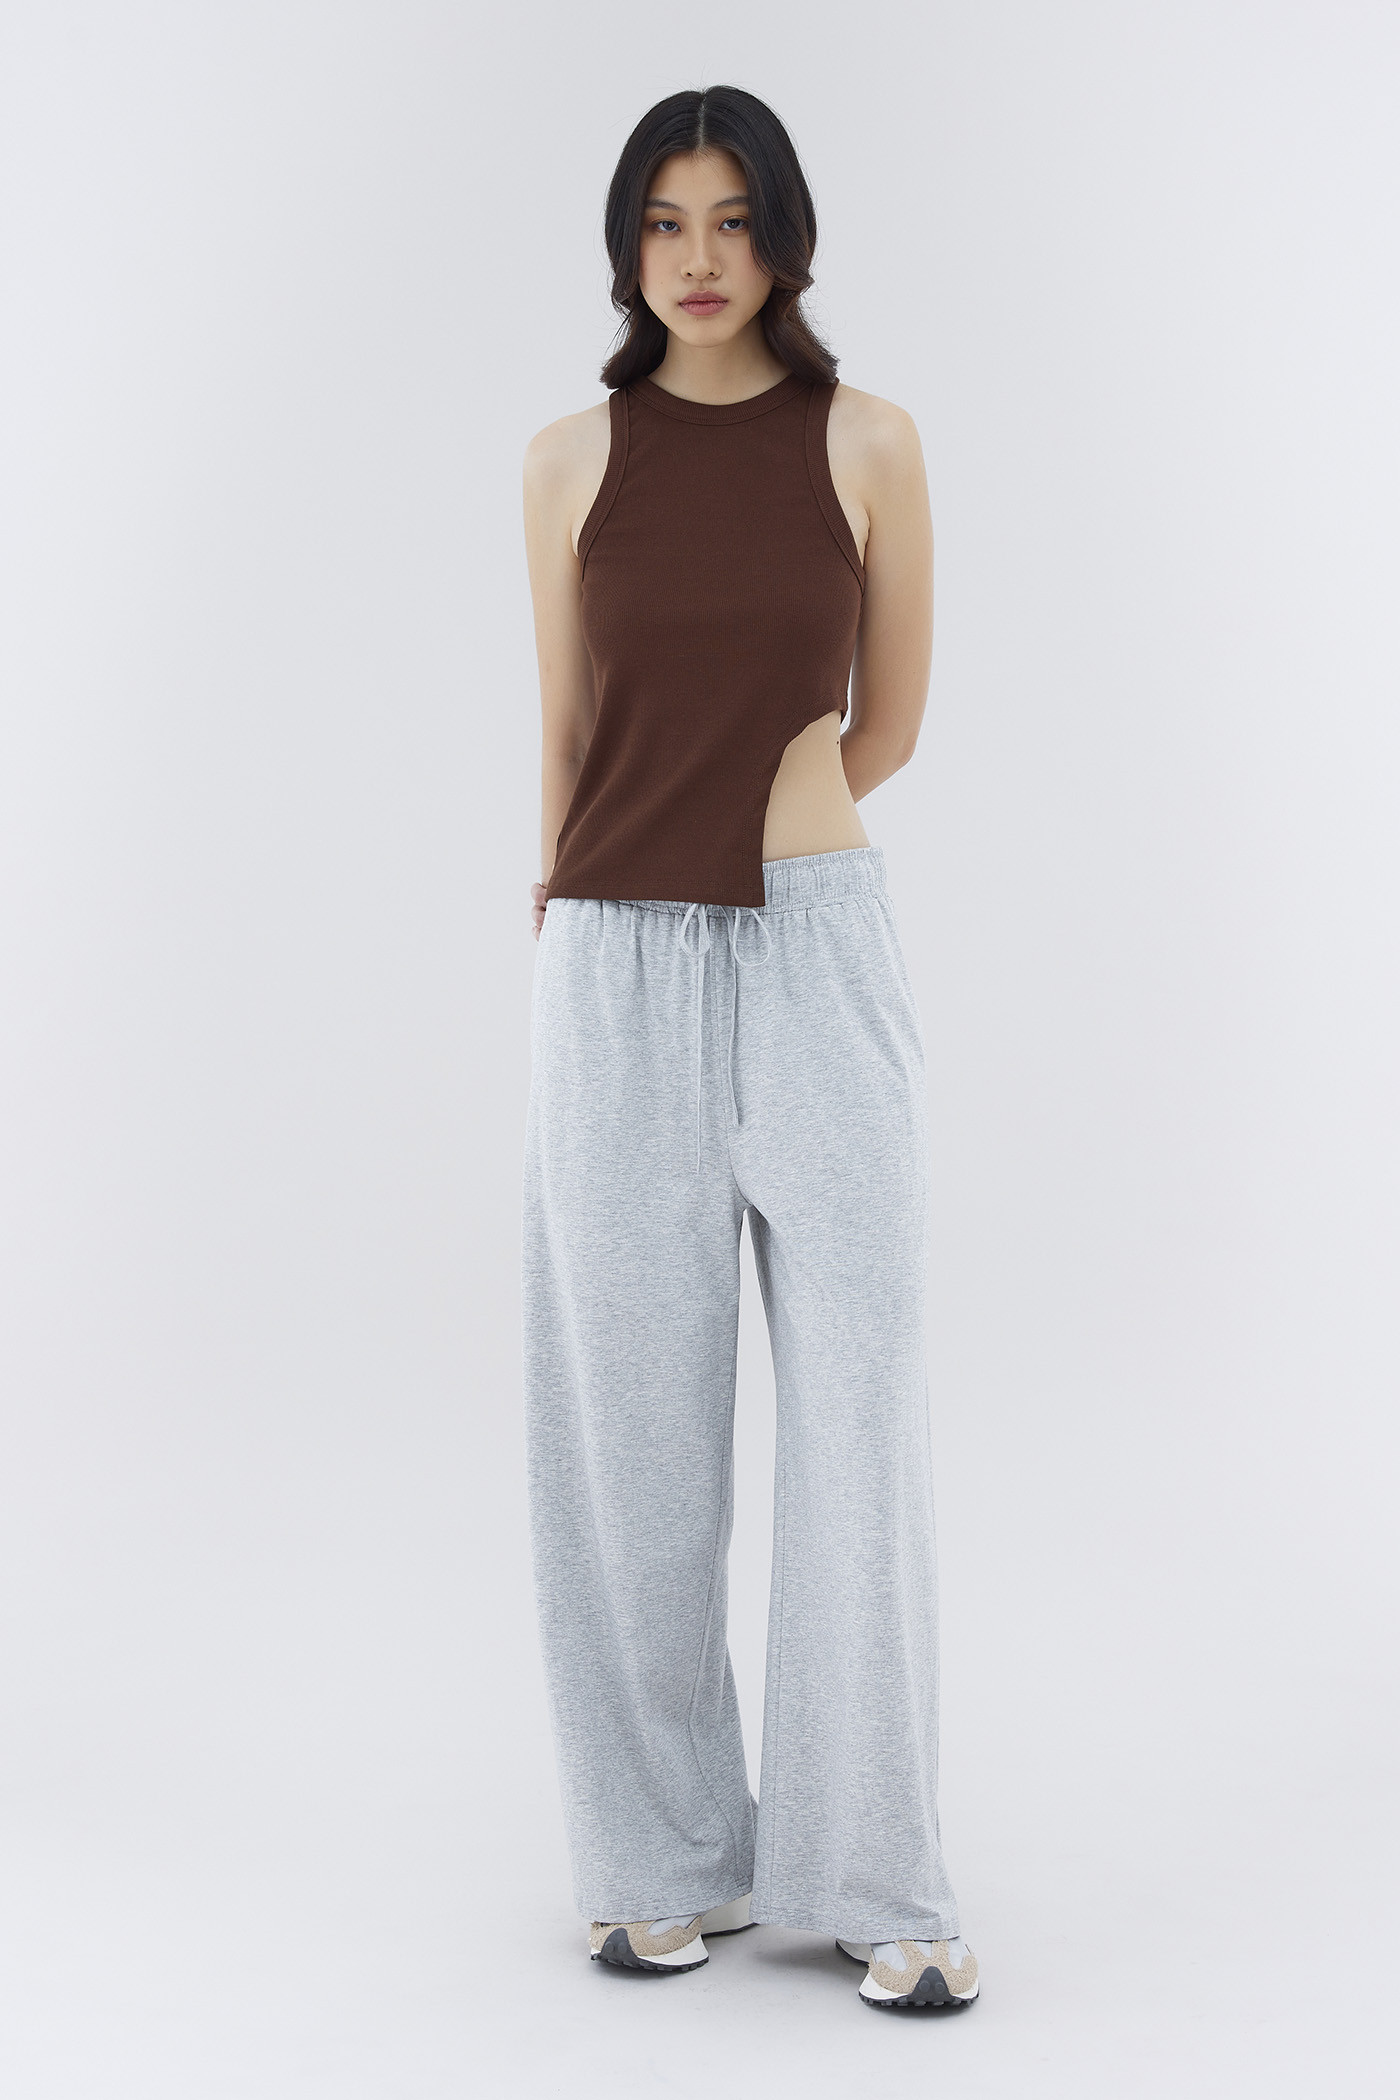 Ervie Mid-Rise Relaxed Sweatpants